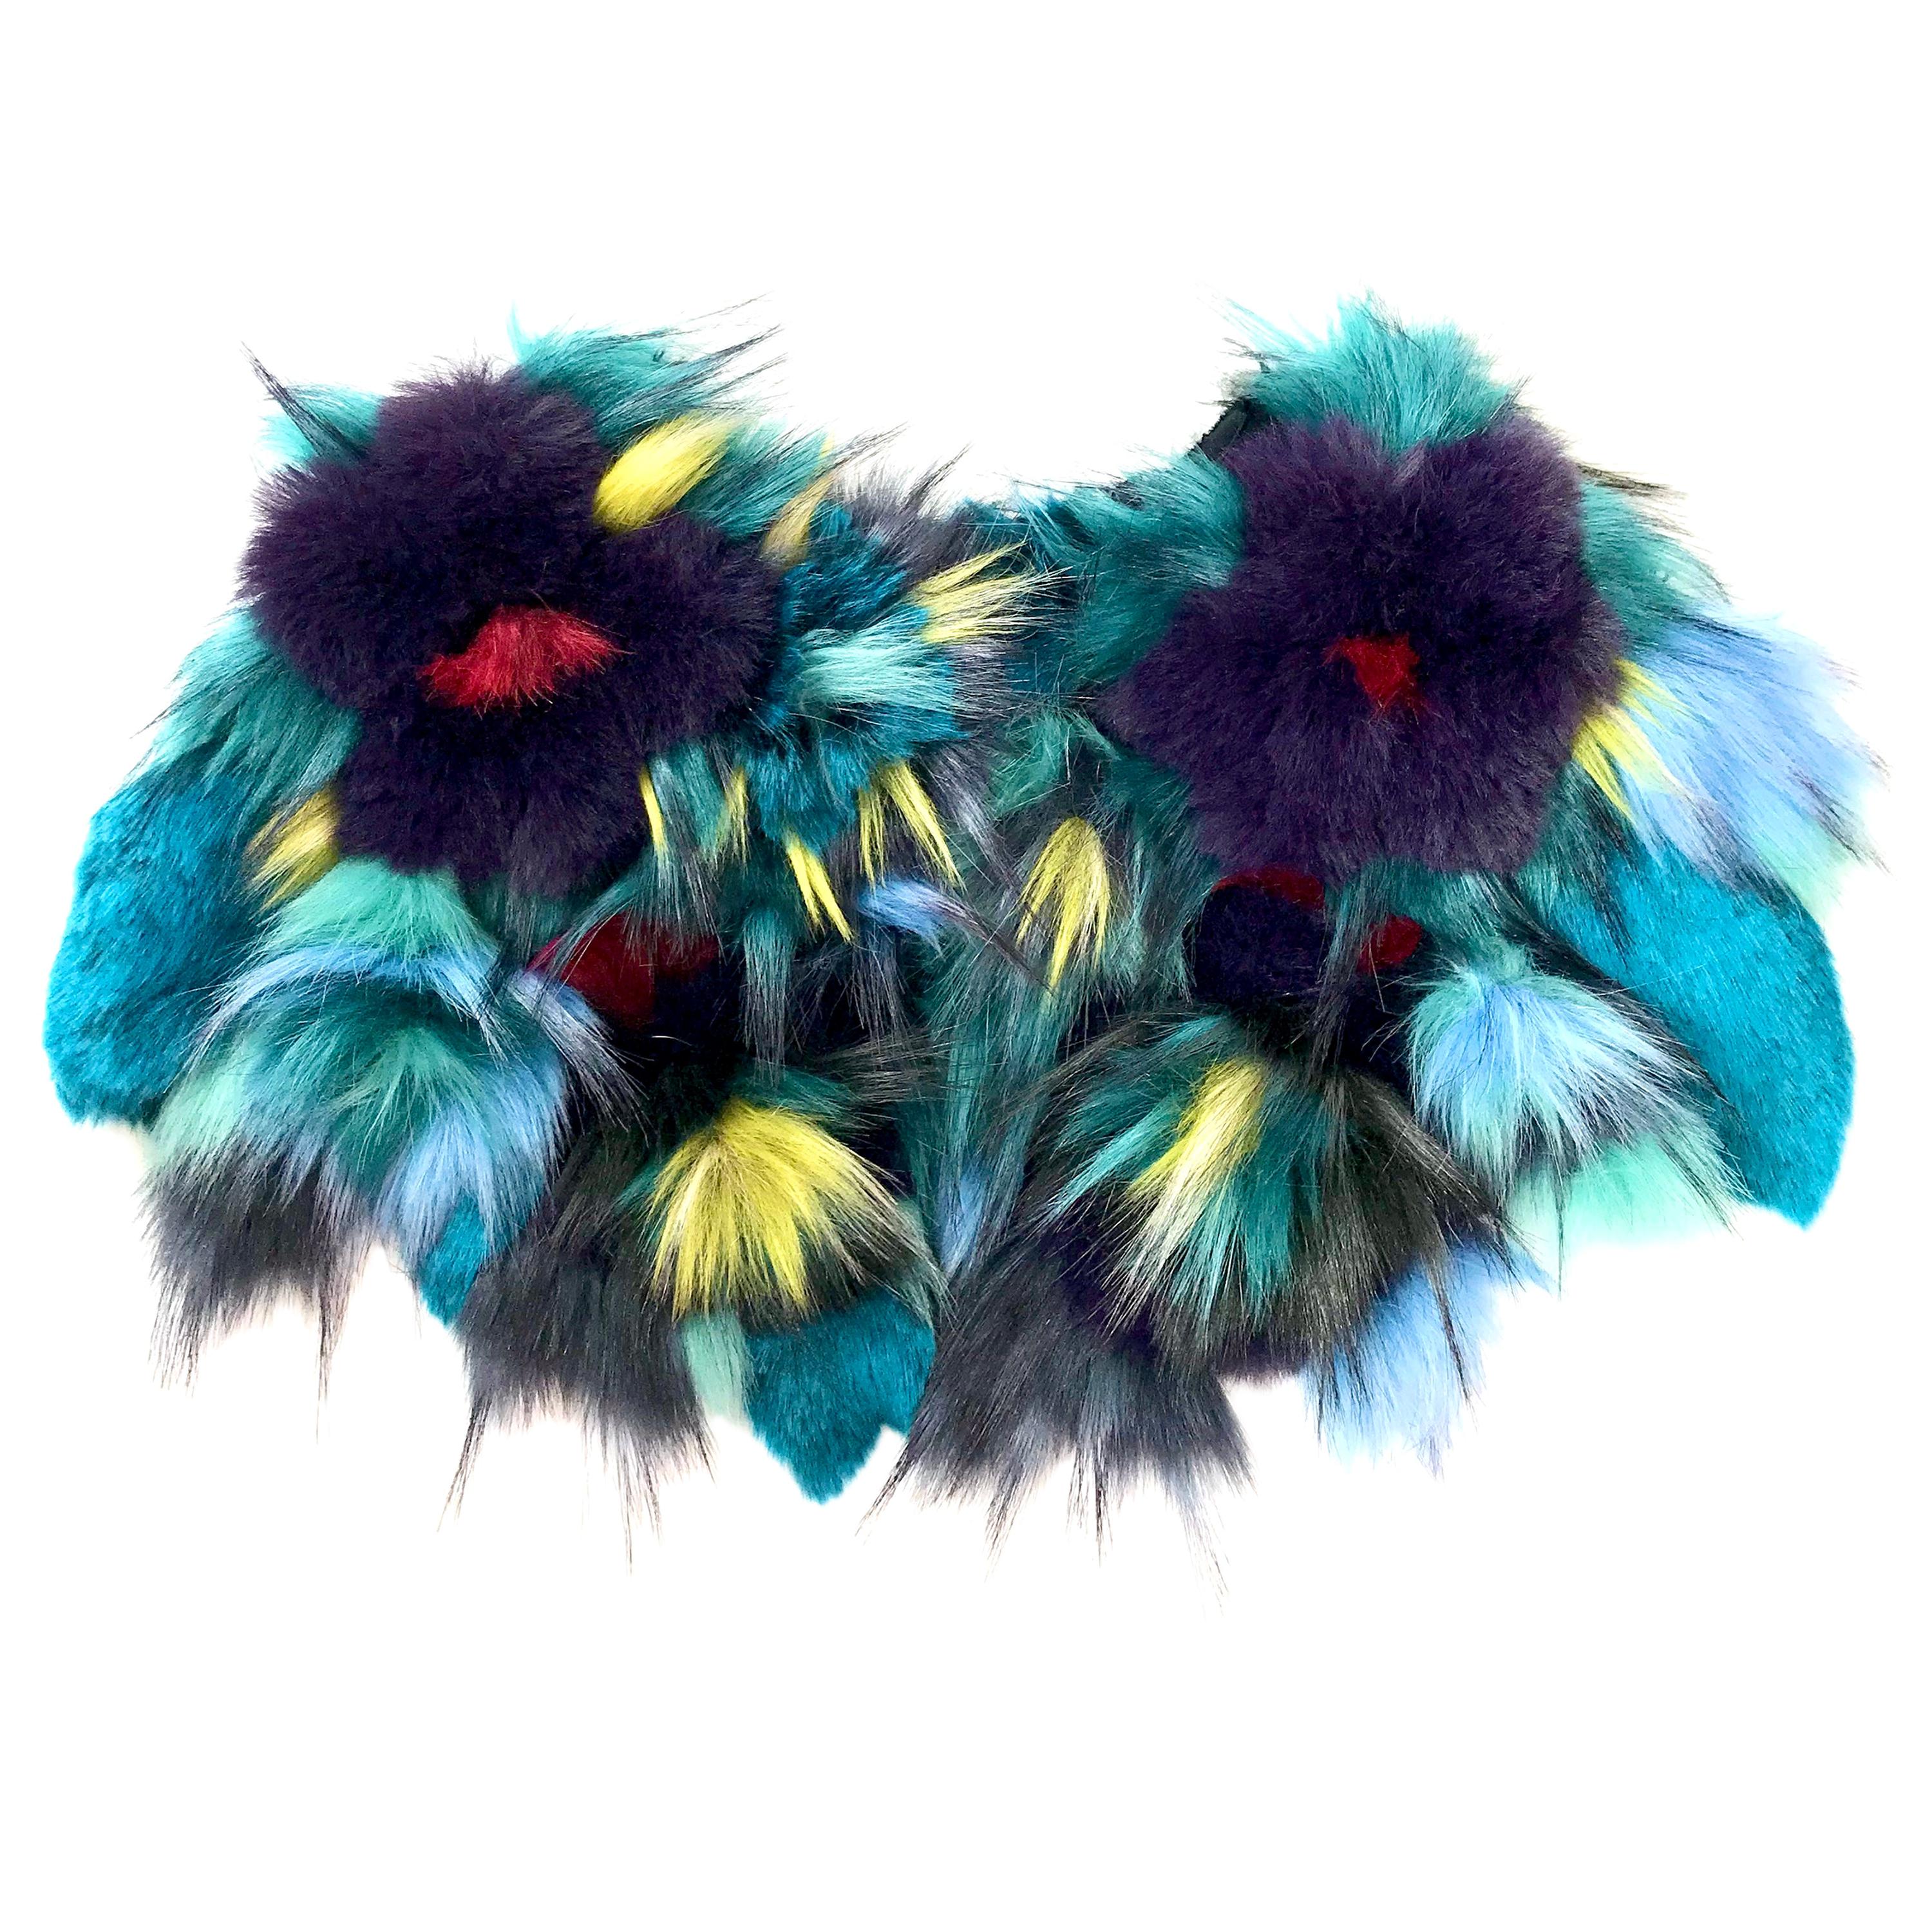 Pelush Botanical Faux Fur Collar With Three Dimensional Flowers - One Size